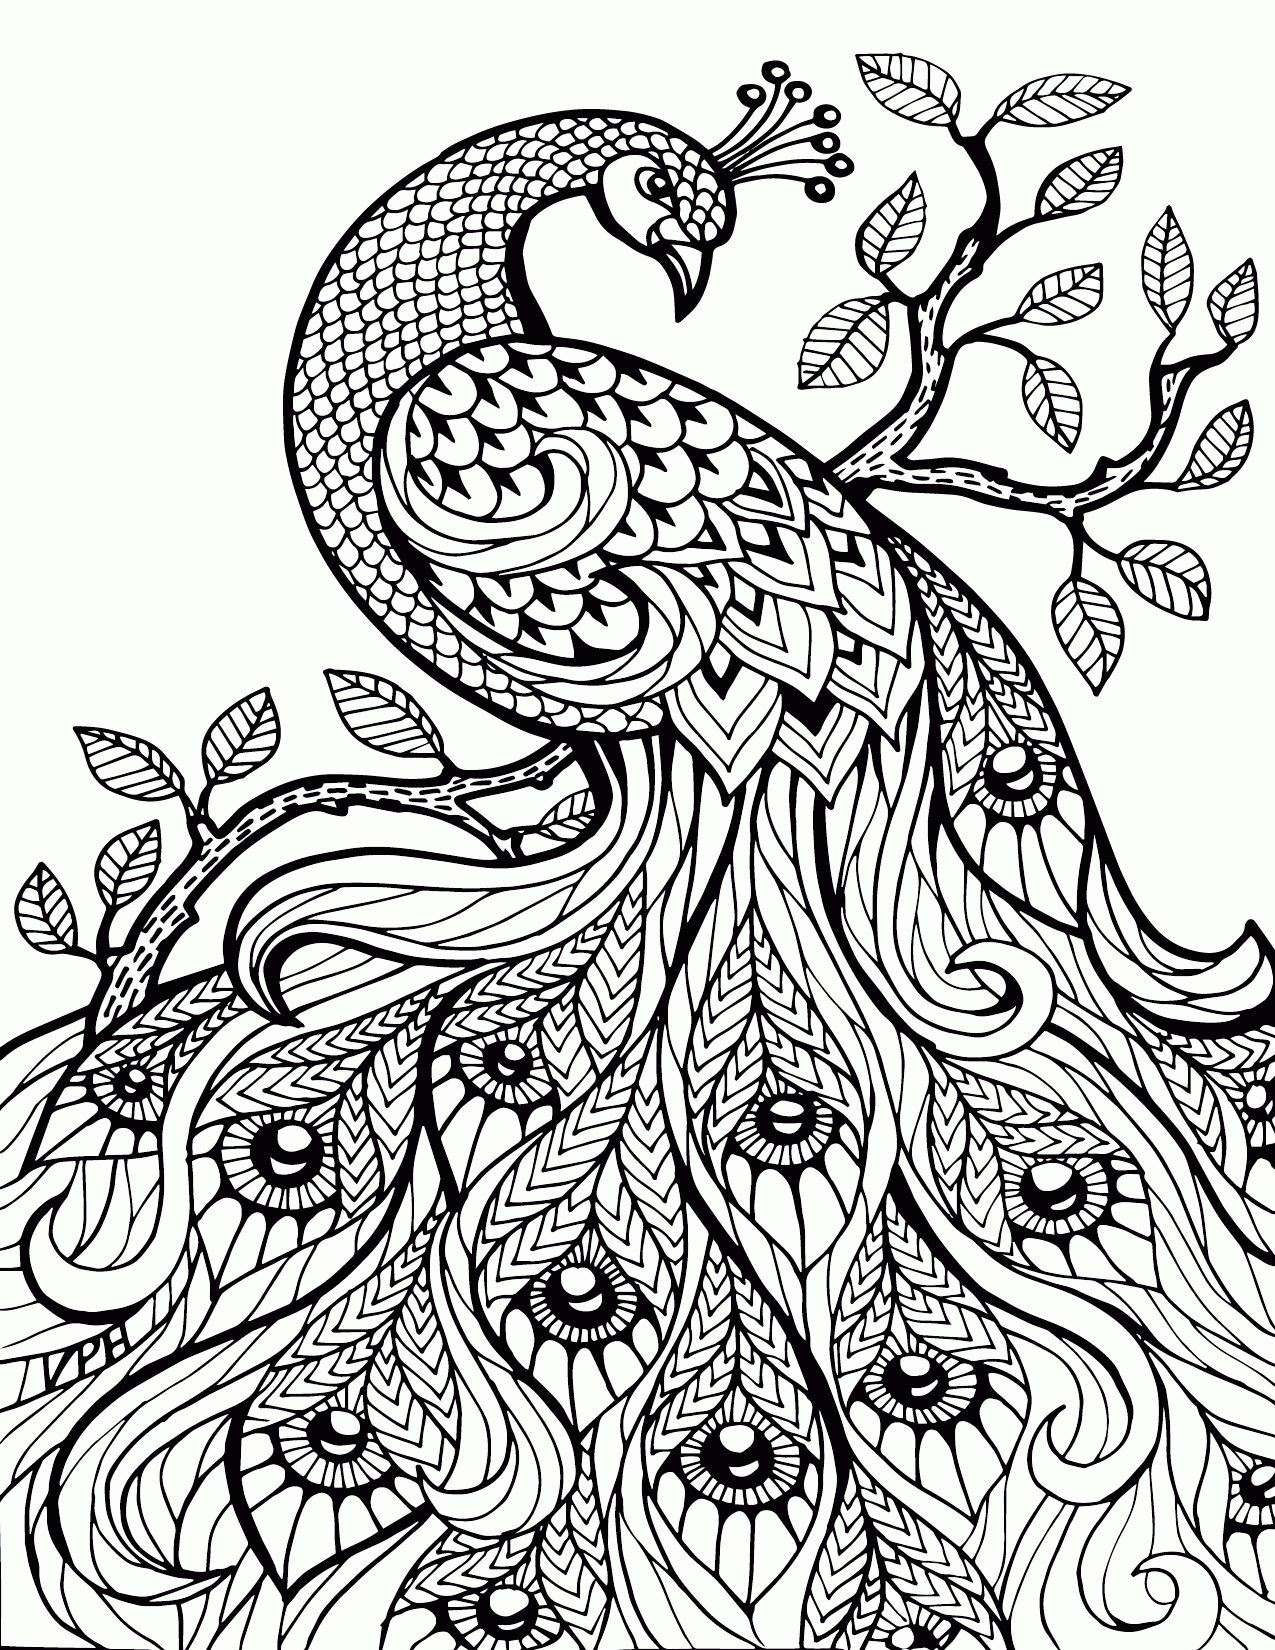 Adult Stress Relief Coloring Pages Printable - Coloring Pages For ...